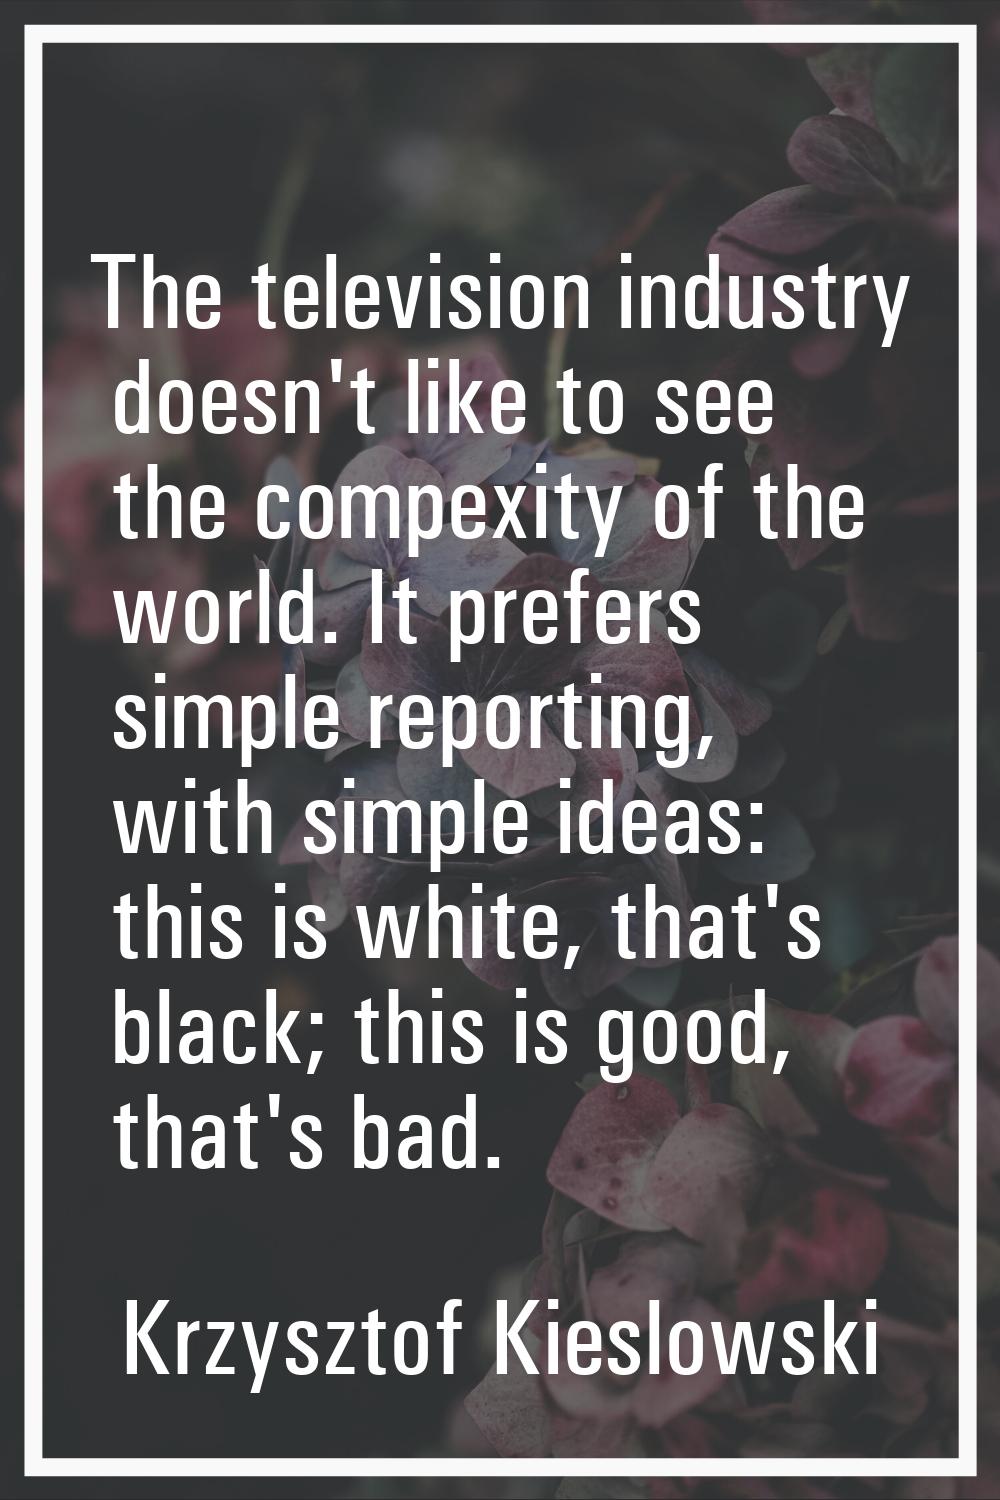 The television industry doesn't like to see the compexity of the world. It prefers simple reporting